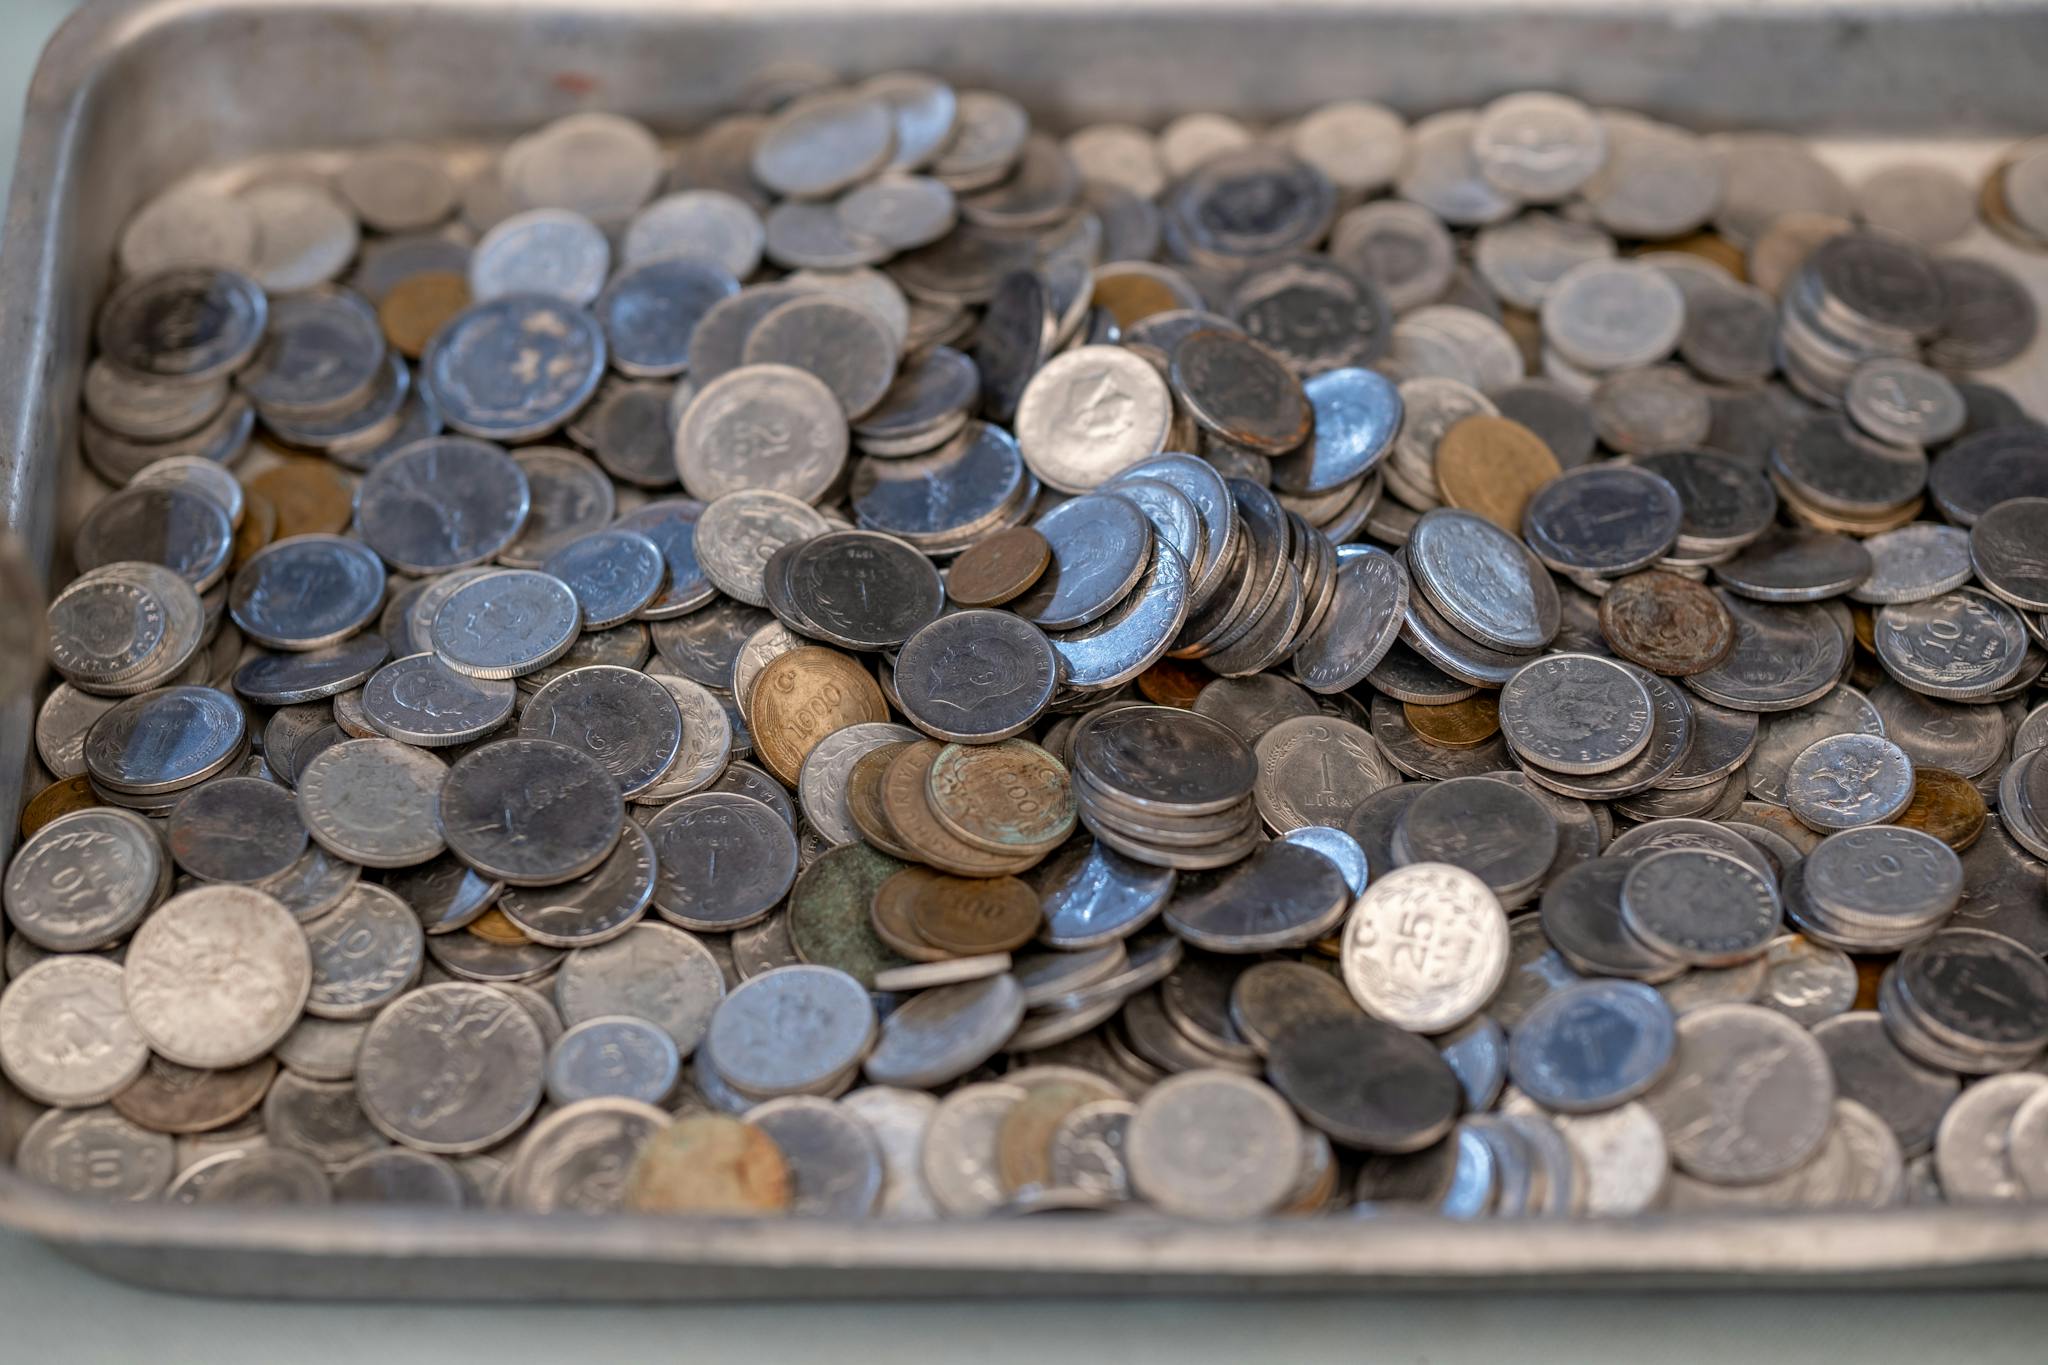 A tray full of coins on a table